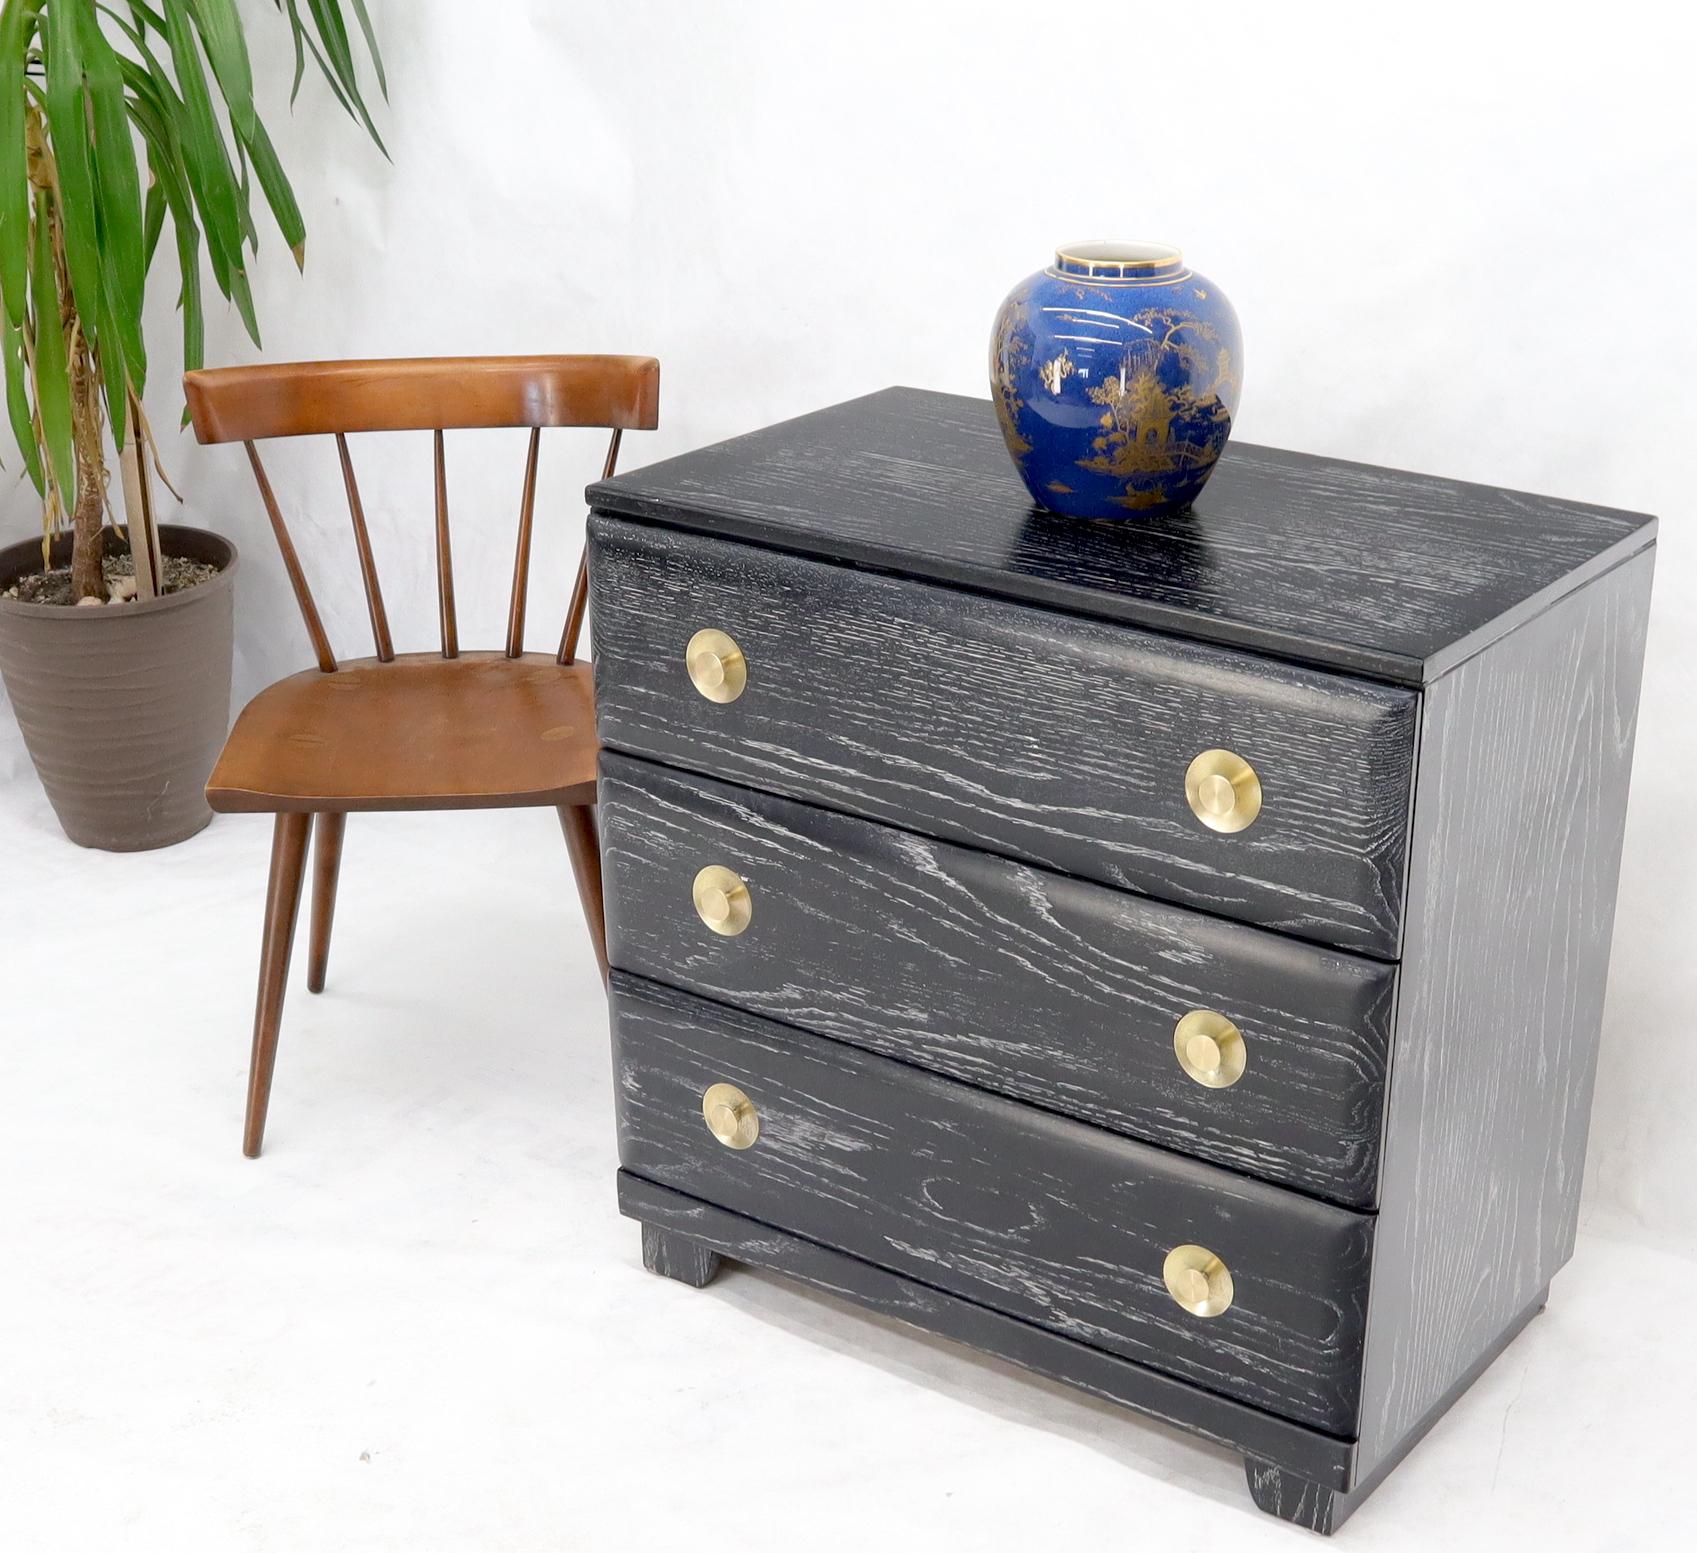 Pair of Mid-Century Modern cerused oak 3 drawer bachelor chests with nice solid brass round accents hardware.